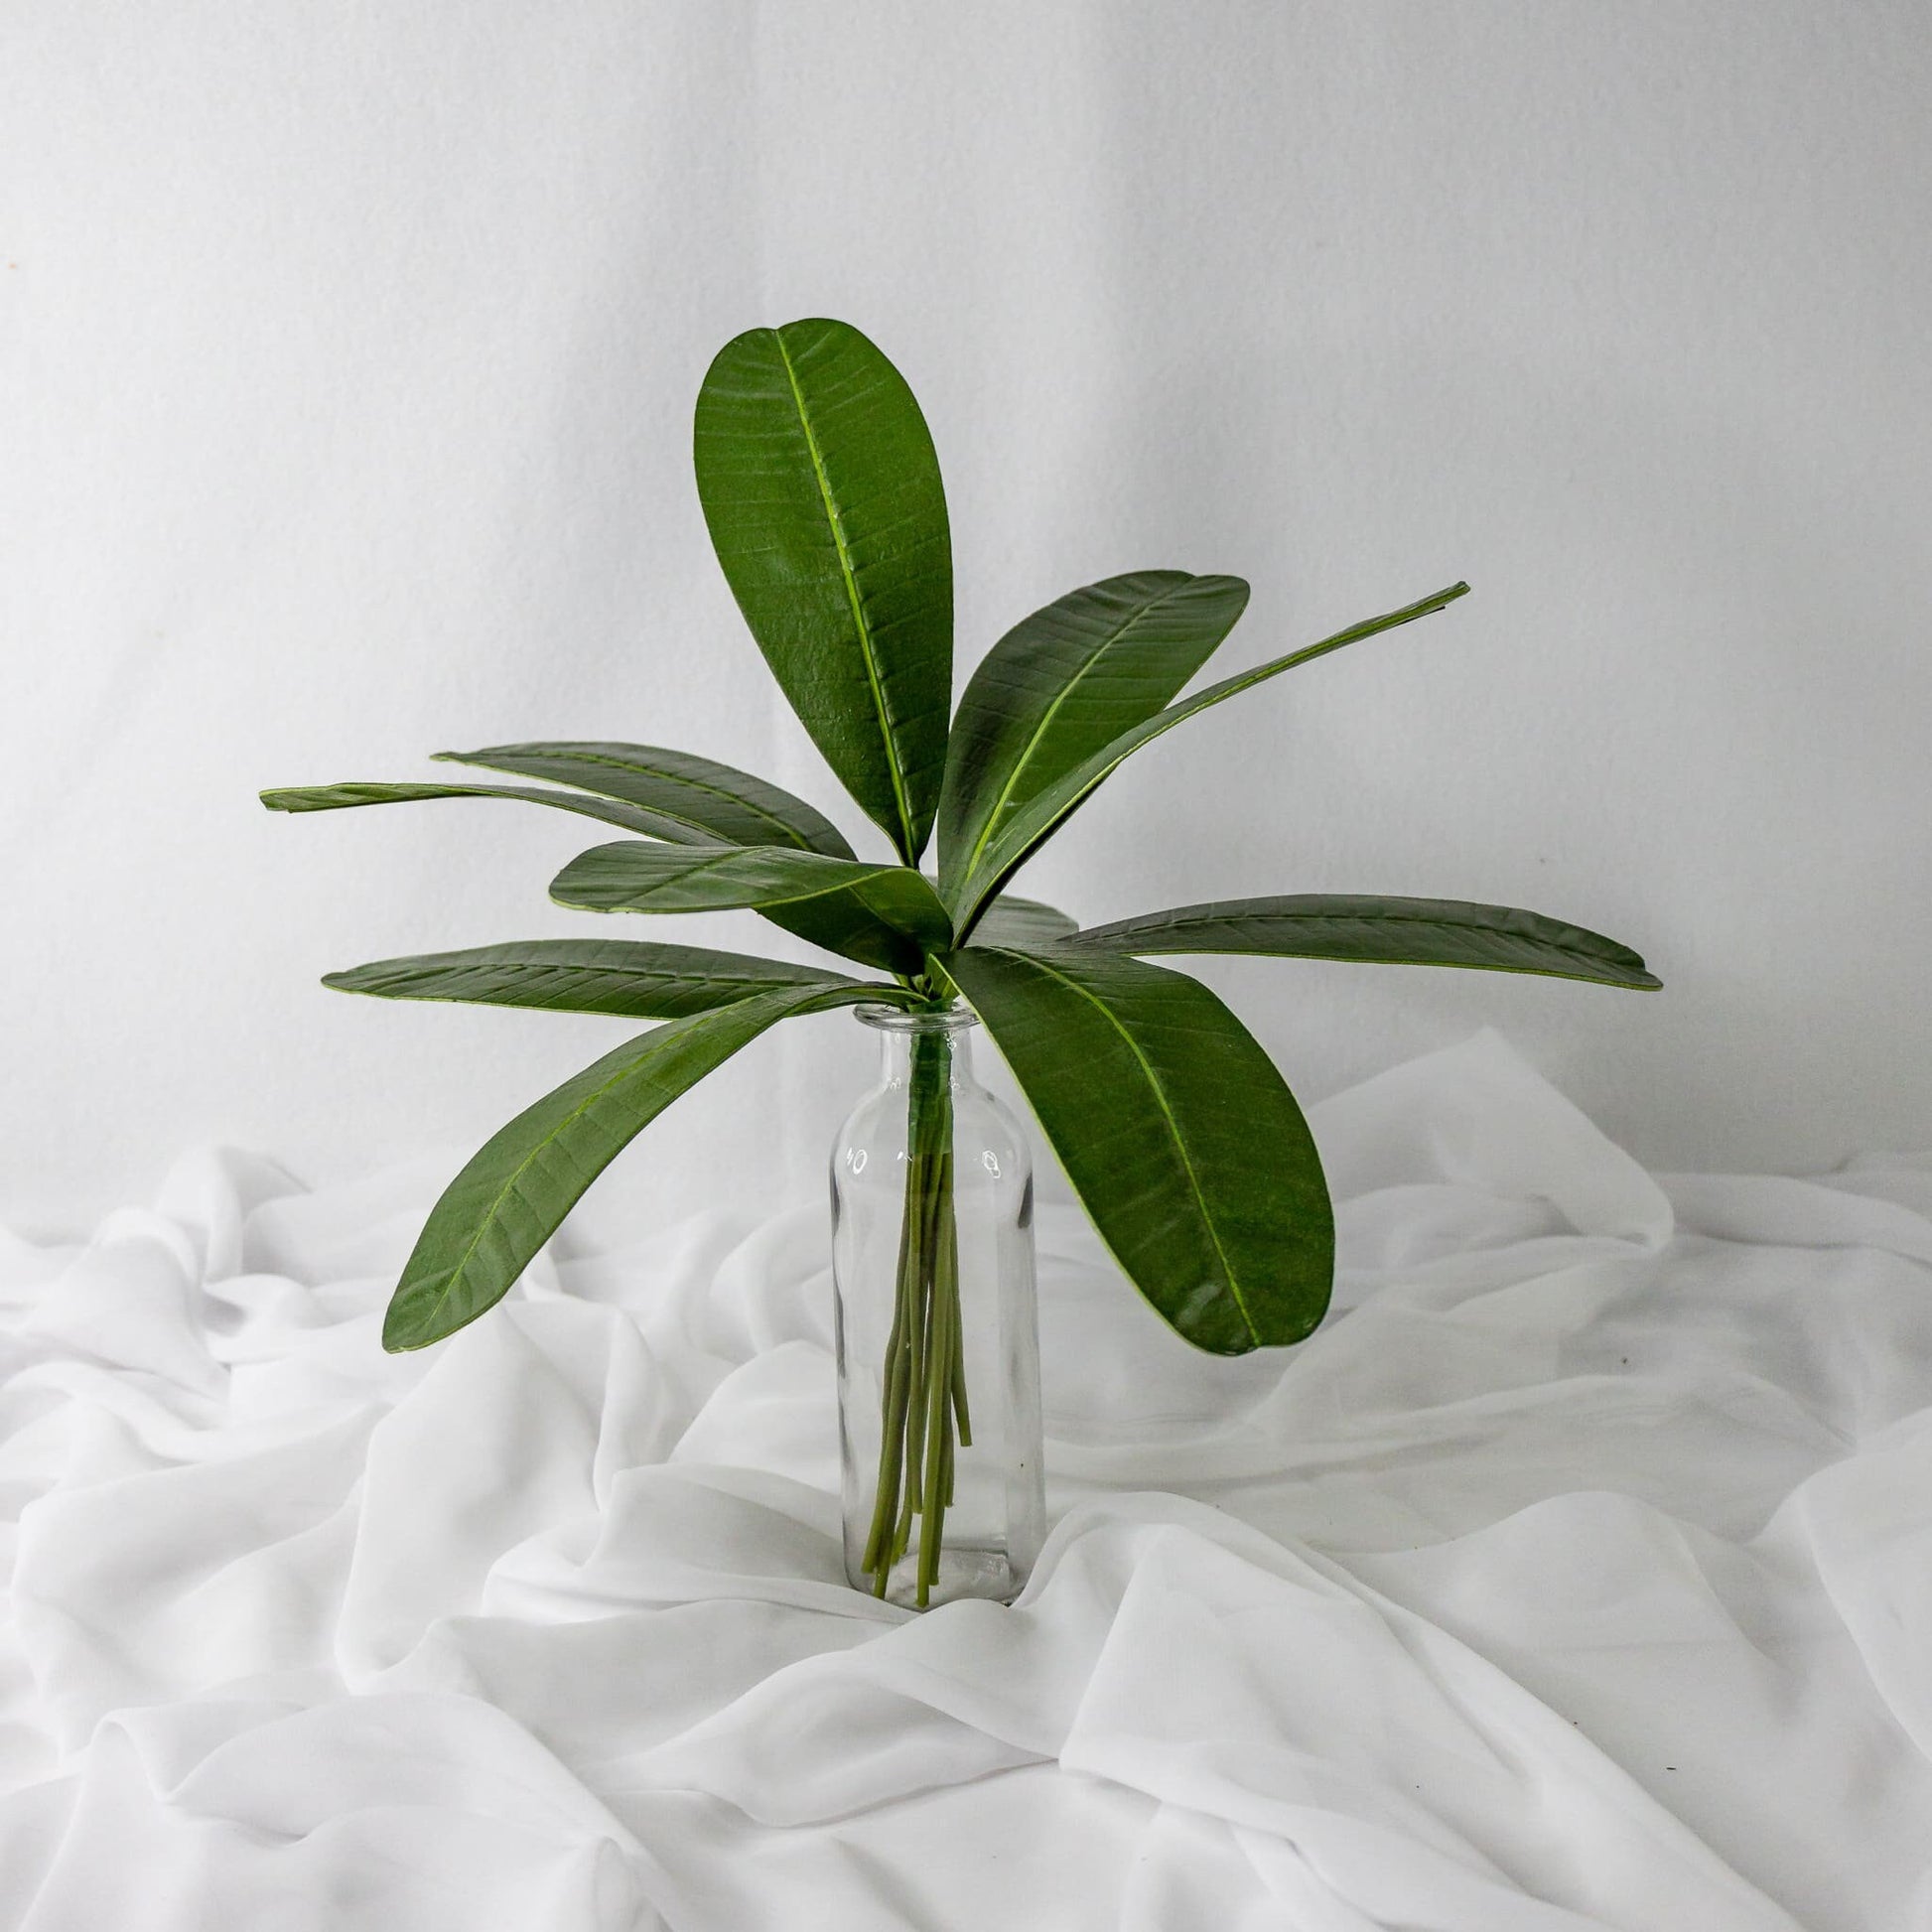 artificial rounded frangipani leaves placed in transparent glass vase